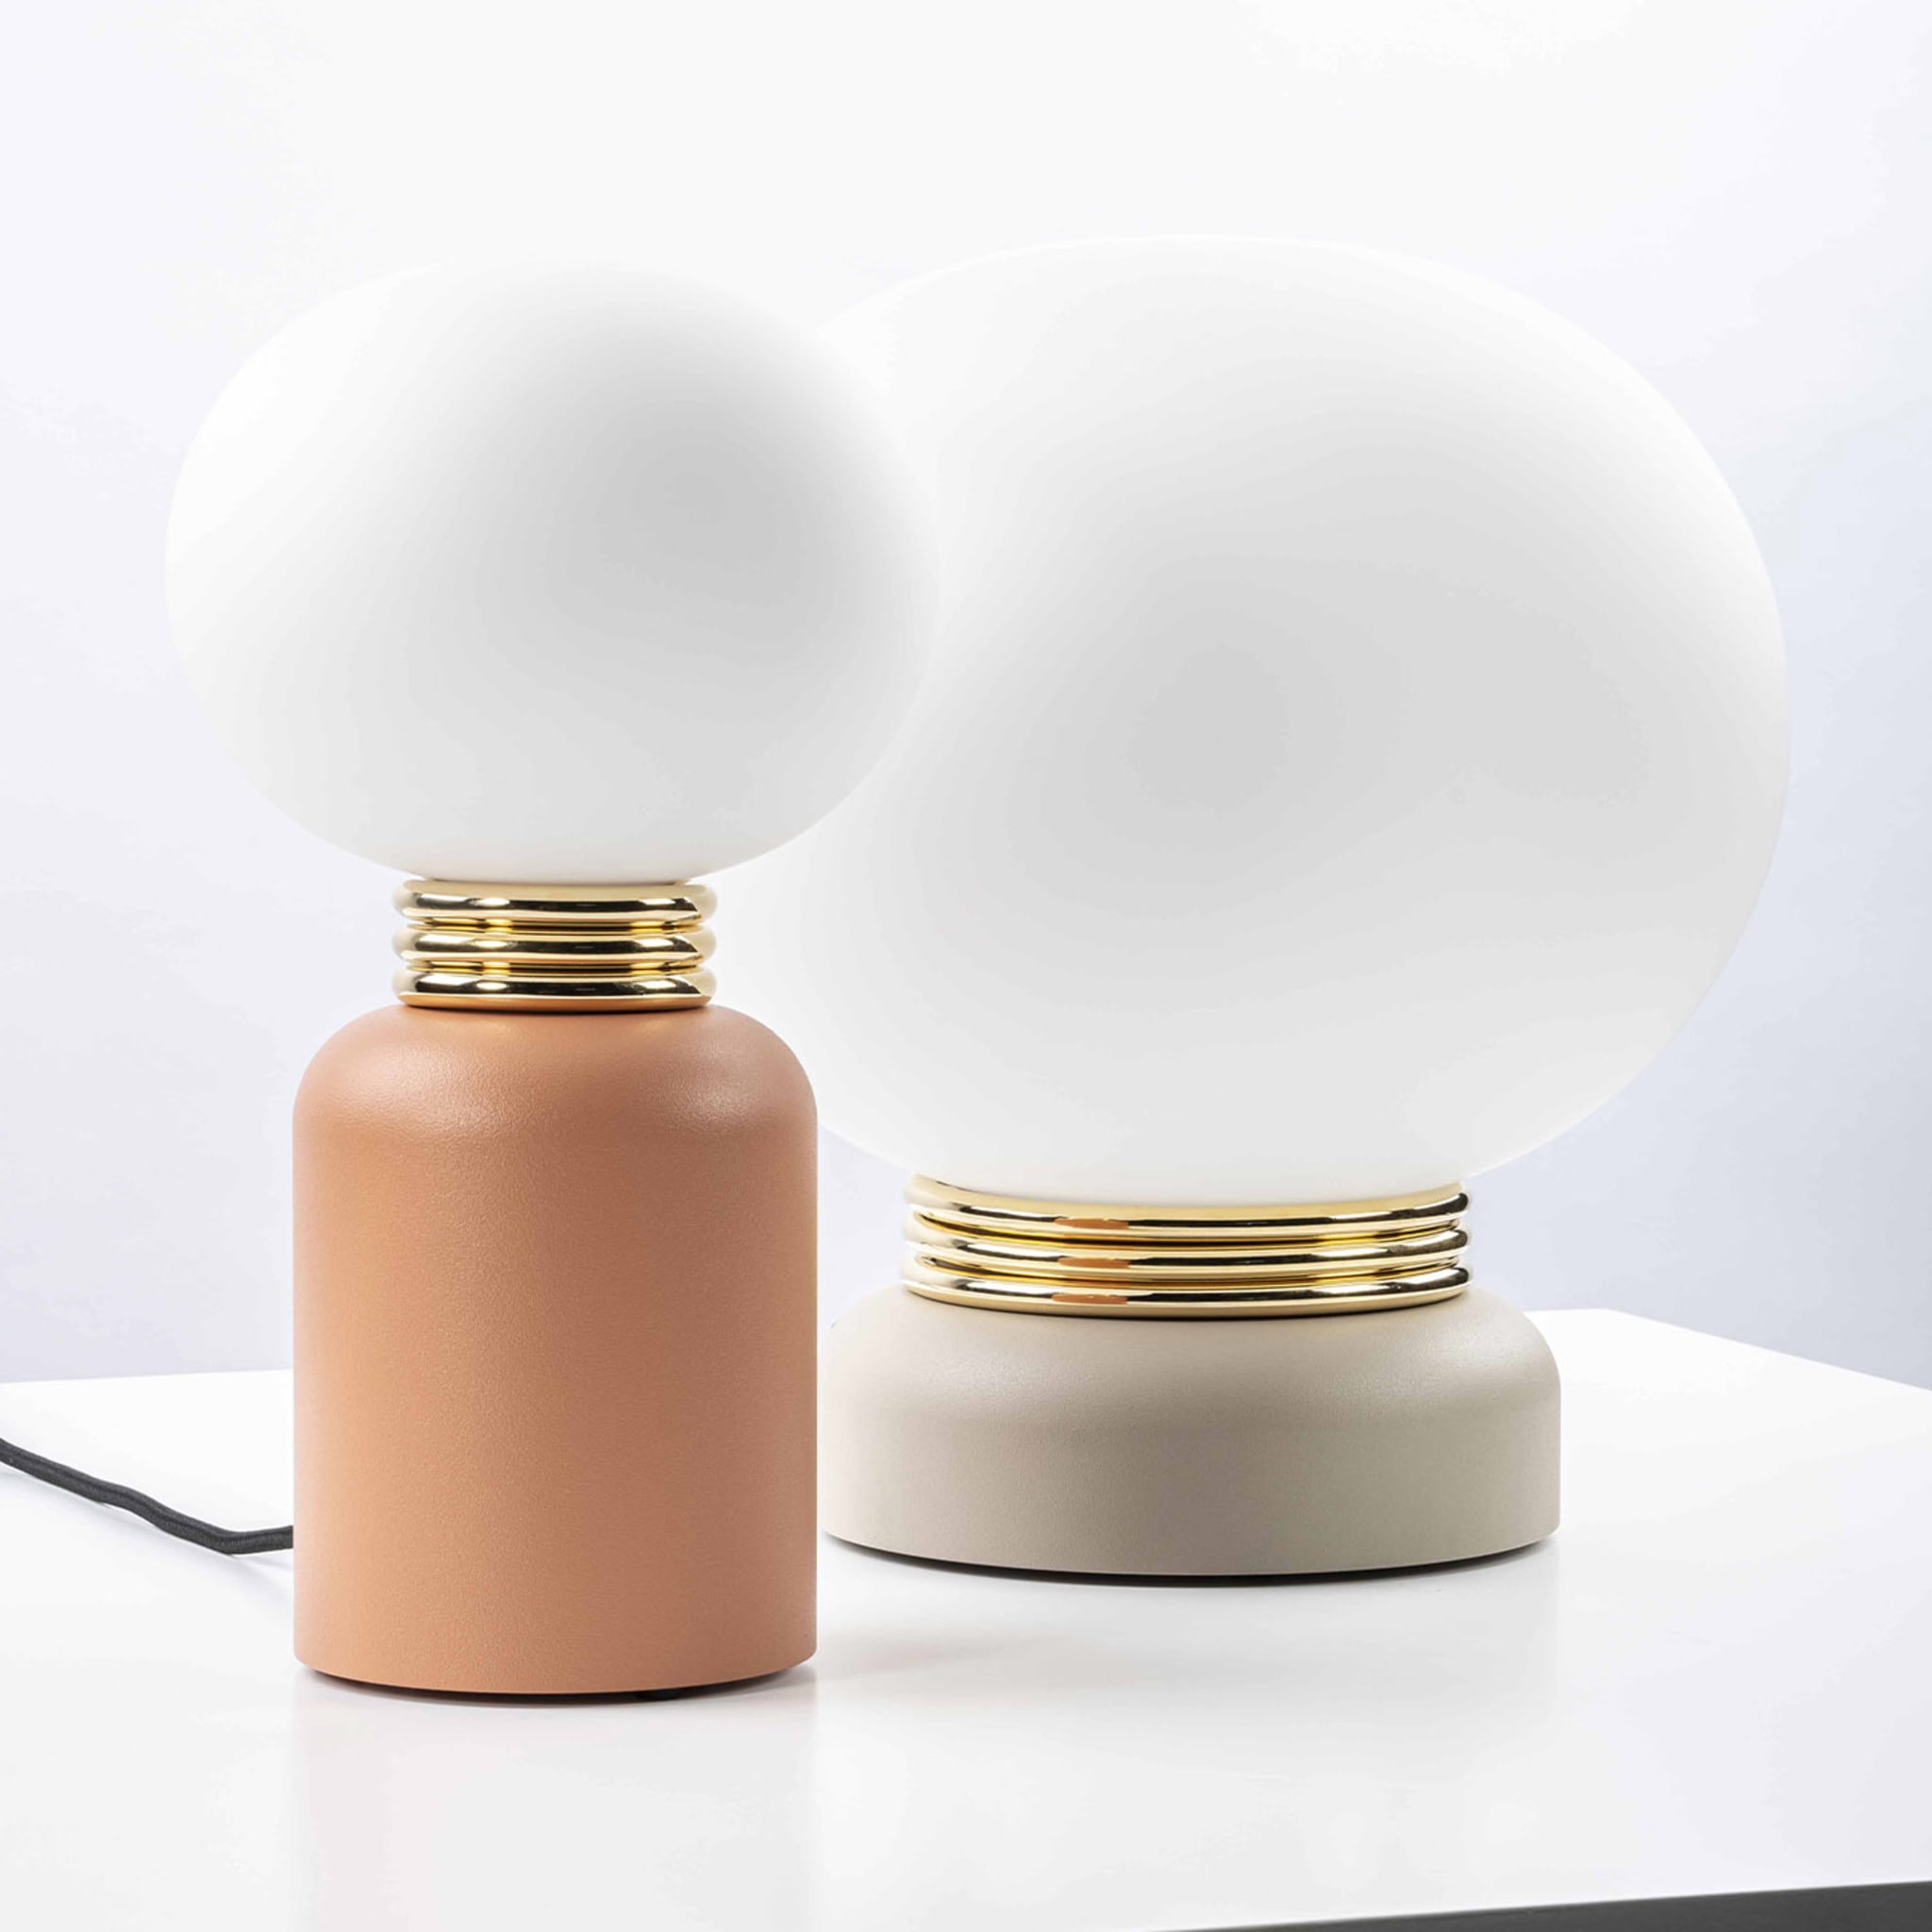 Karen S Taupe Small Lamp by Luca Barengo - Alternative view 4